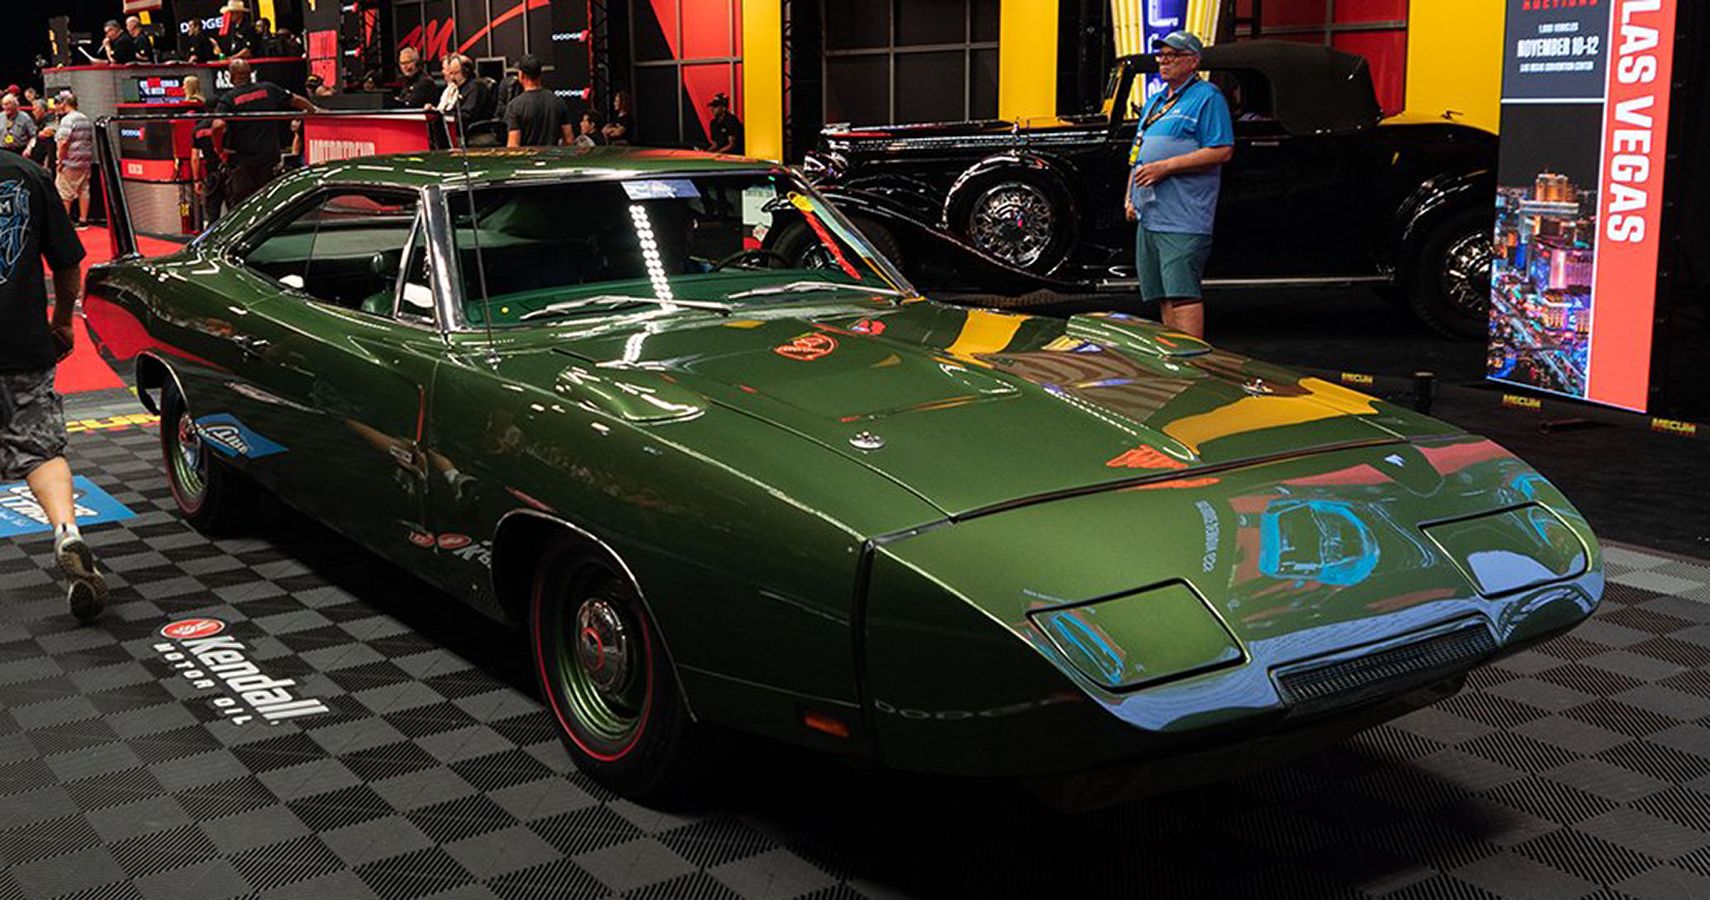 These Are The 10 Most Expensive Classic Muscle Cars Ever Sold At Auction